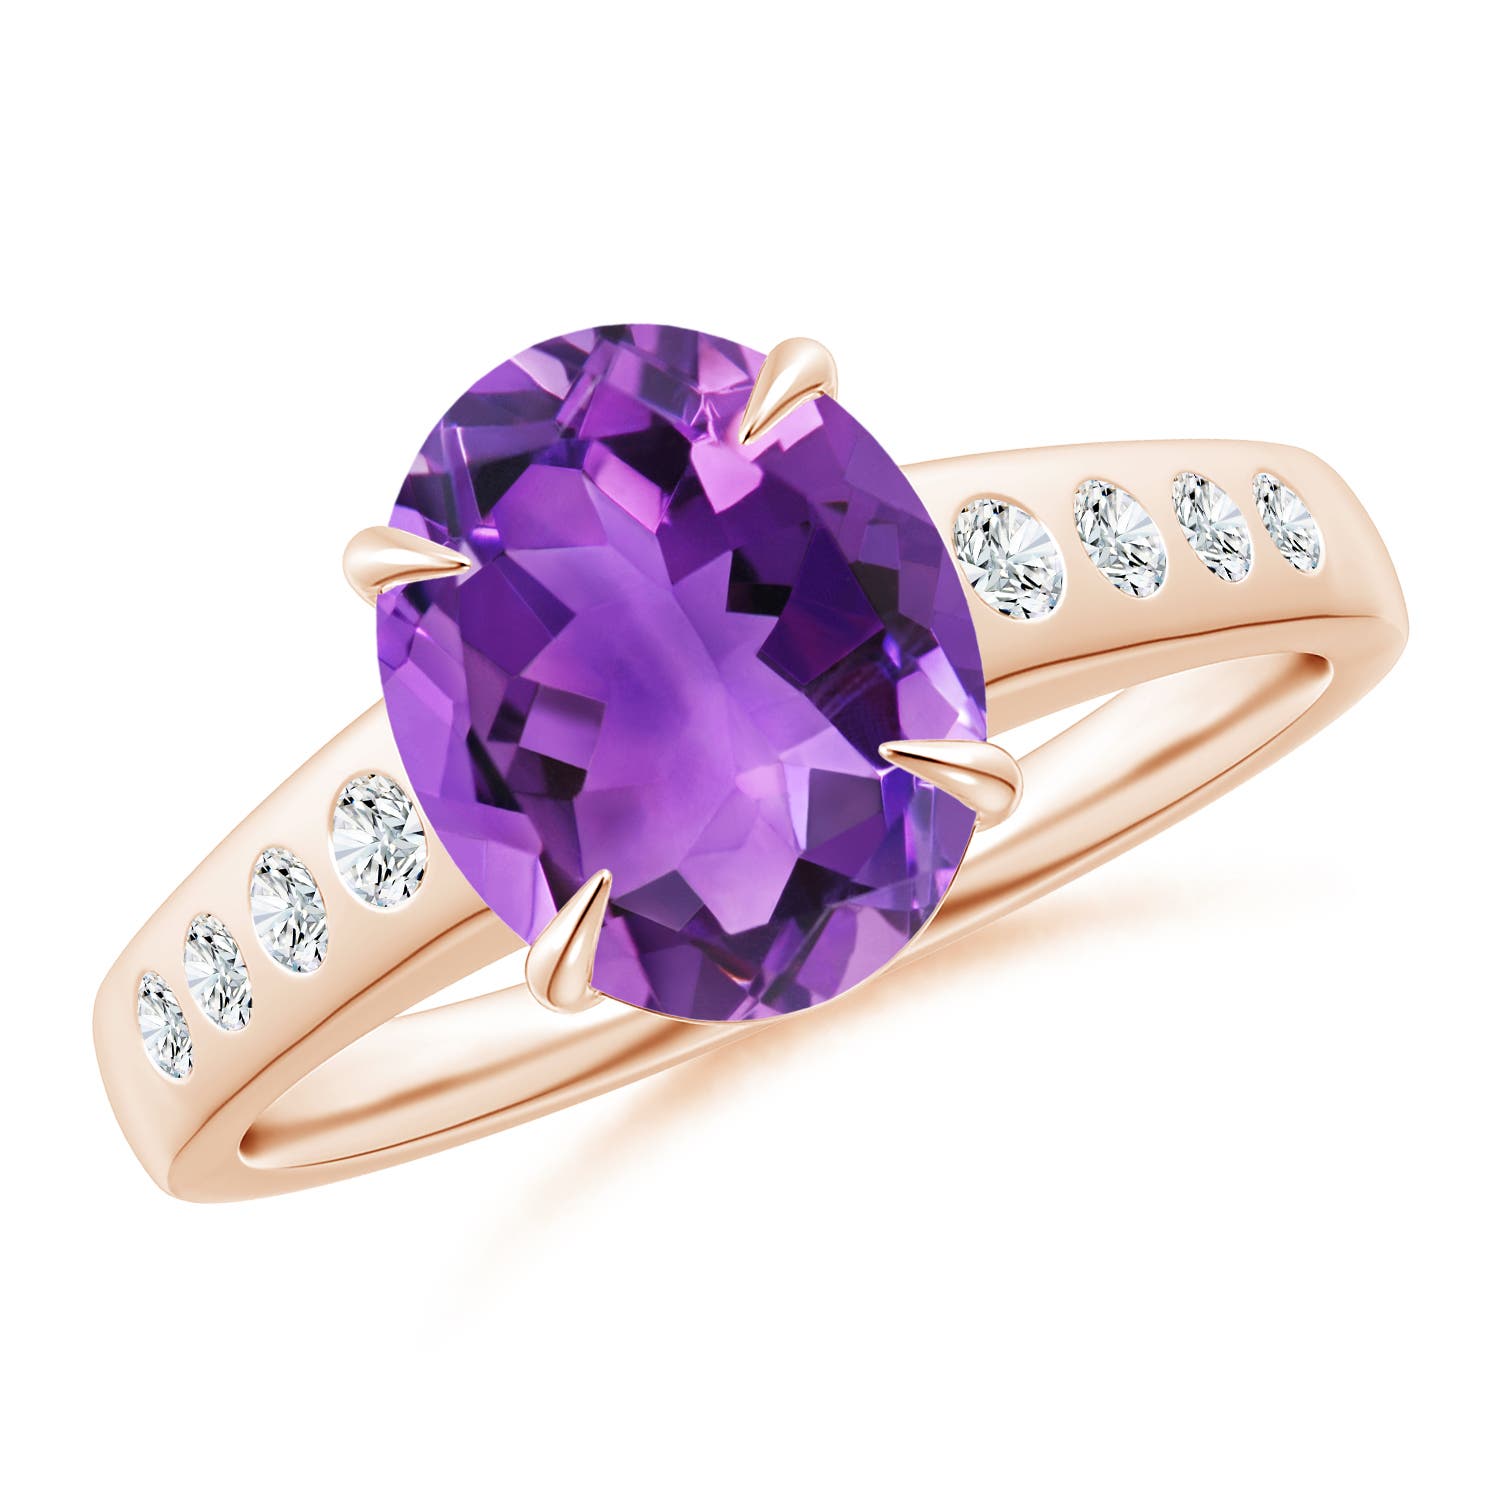 AAA - Amethyst / 2.5 CT / 14 KT Rose Gold